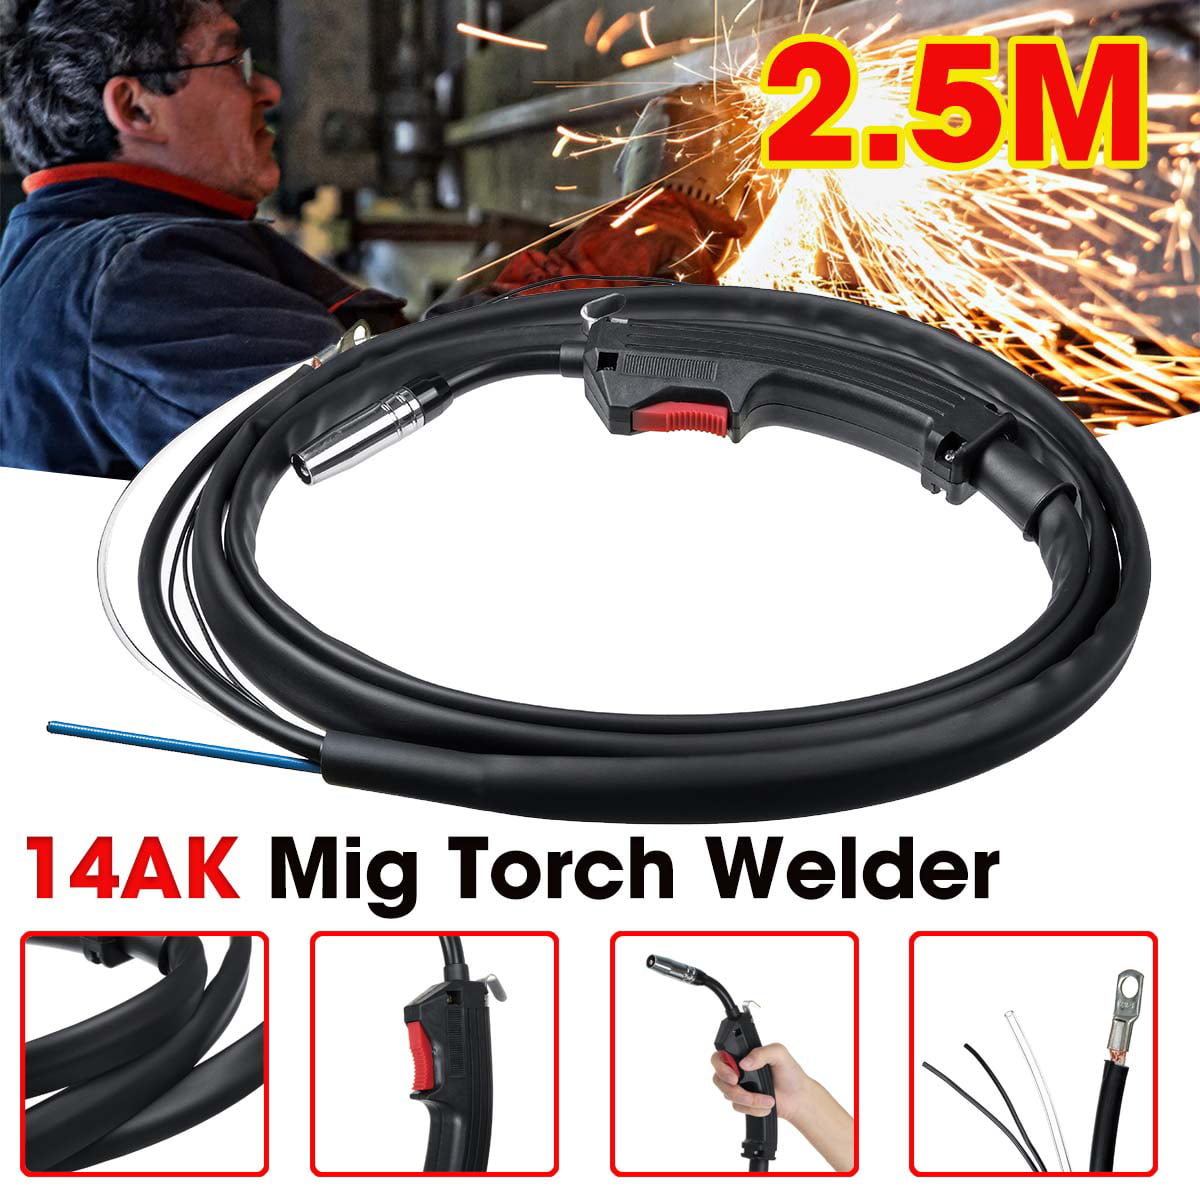 Welding Accessory Welder Complete Replacement Mig/Flux Torch High Quality 